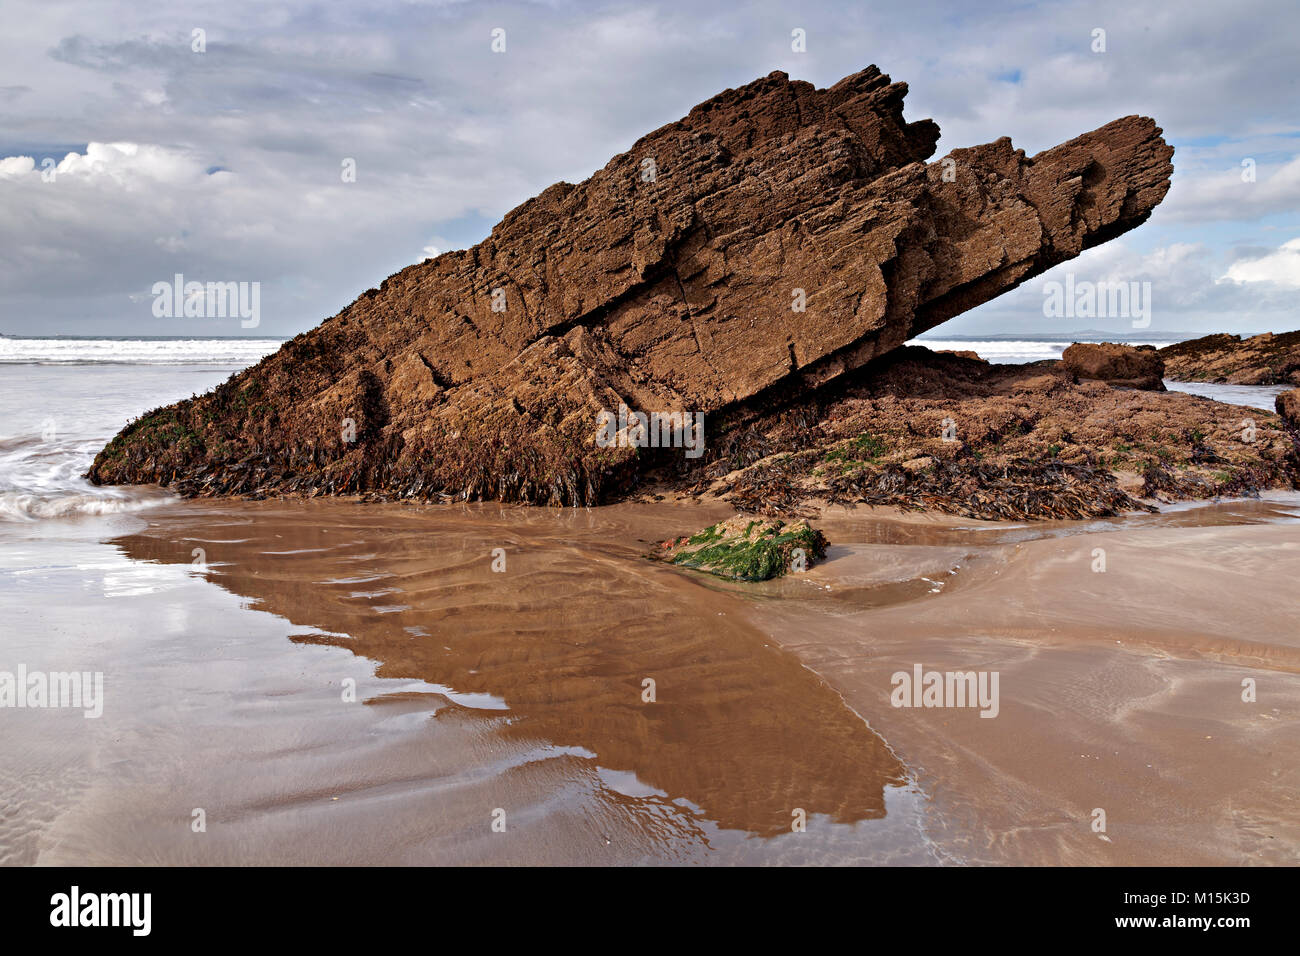 Rock formation in wet sand on the beach at Broad Haven on the Welsh coast Stock Photo